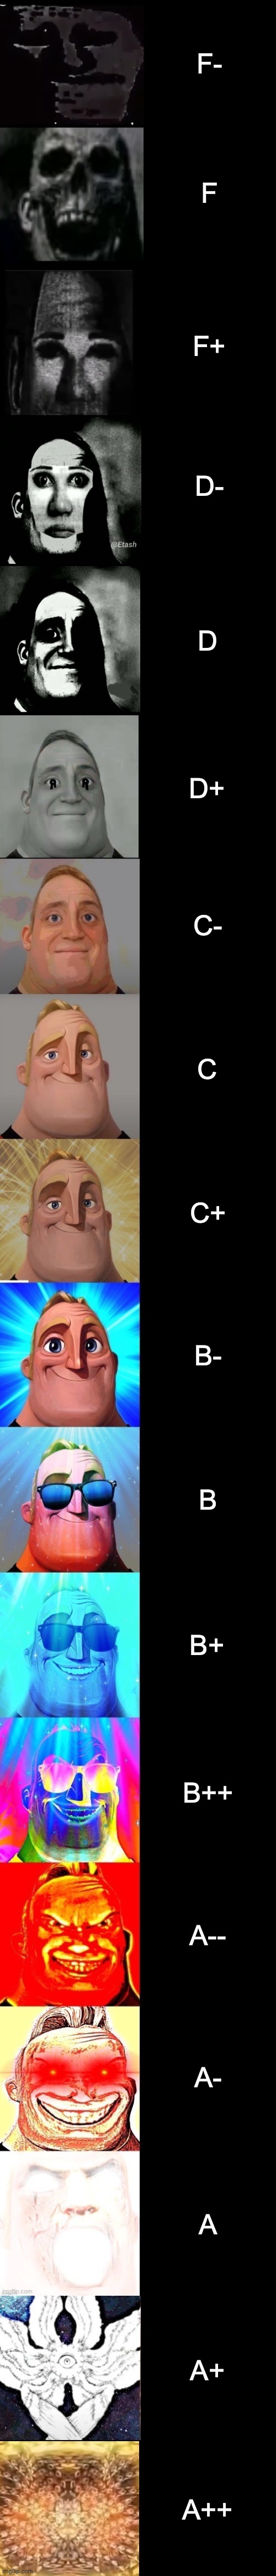 All the grades | F-; F; F+; D-; D; D+; C-; C; C+; B-; B; B+; B++; A--; A-; A; A+; A++ | image tagged in mr incredible from trollge to god,grades,mr incredible,uncanny,mr incredible becoming canny,trollge | made w/ Imgflip meme maker